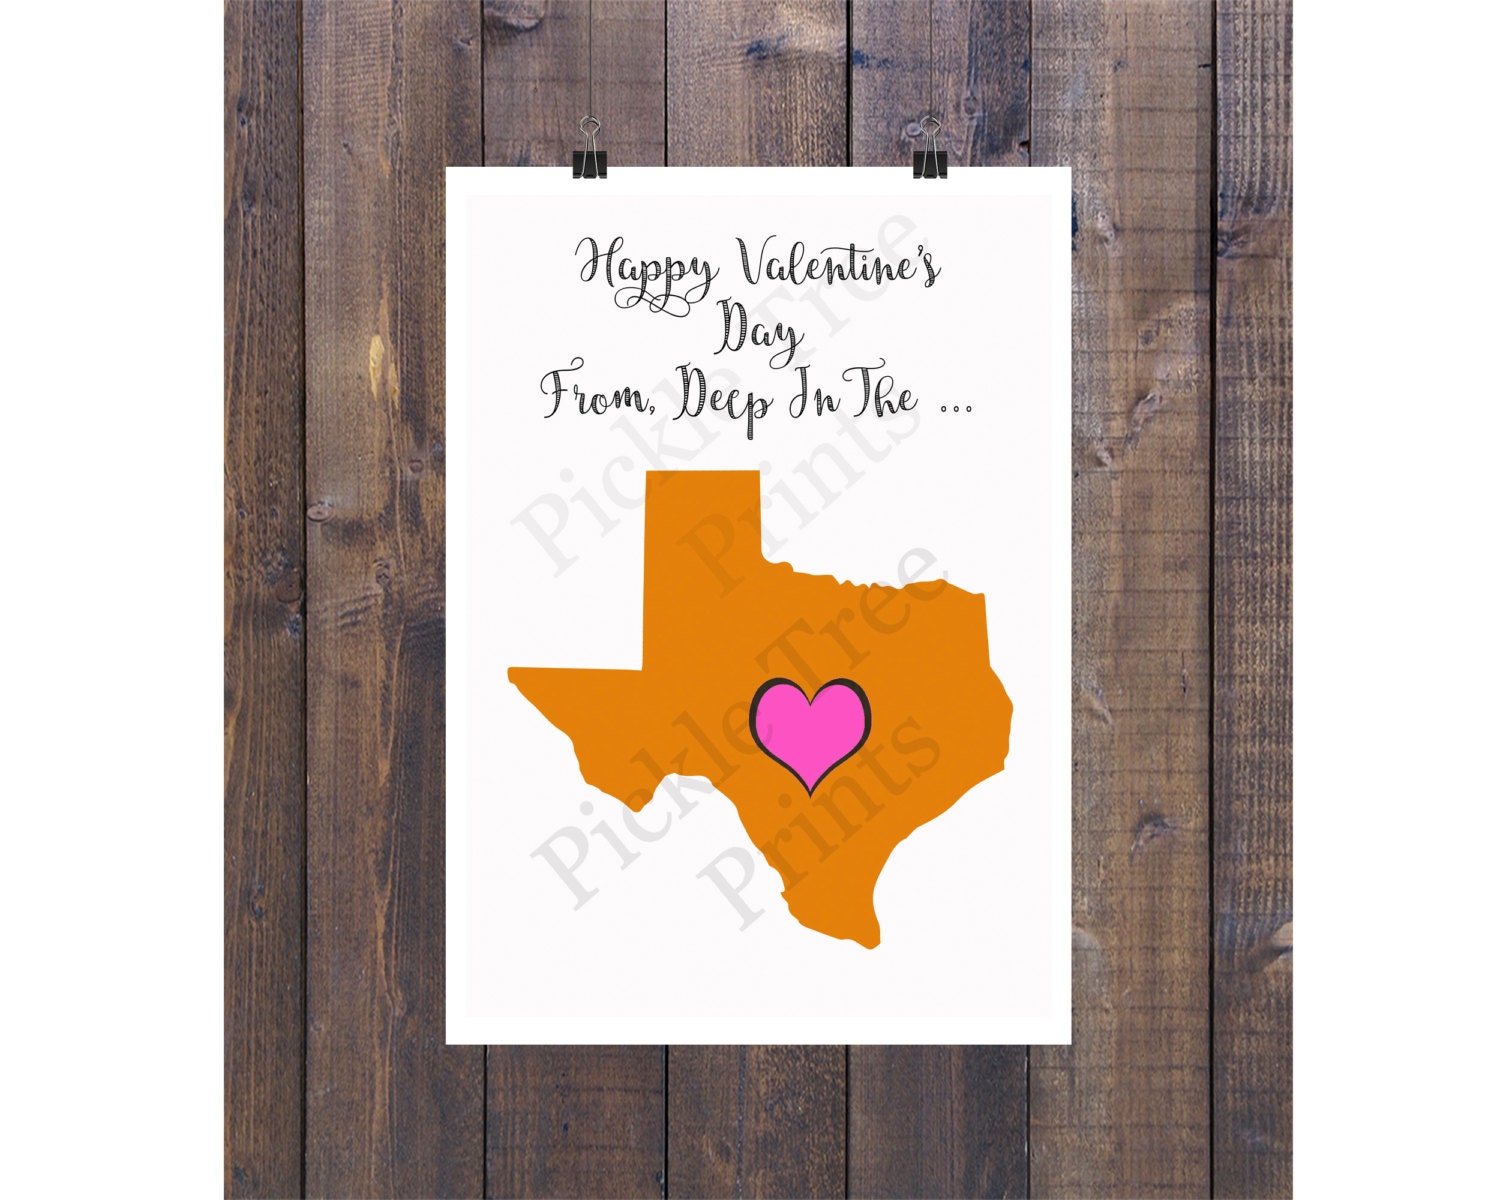 Happy Valentine's Day Card from Deep in the Heart of Texas1500 x 1200